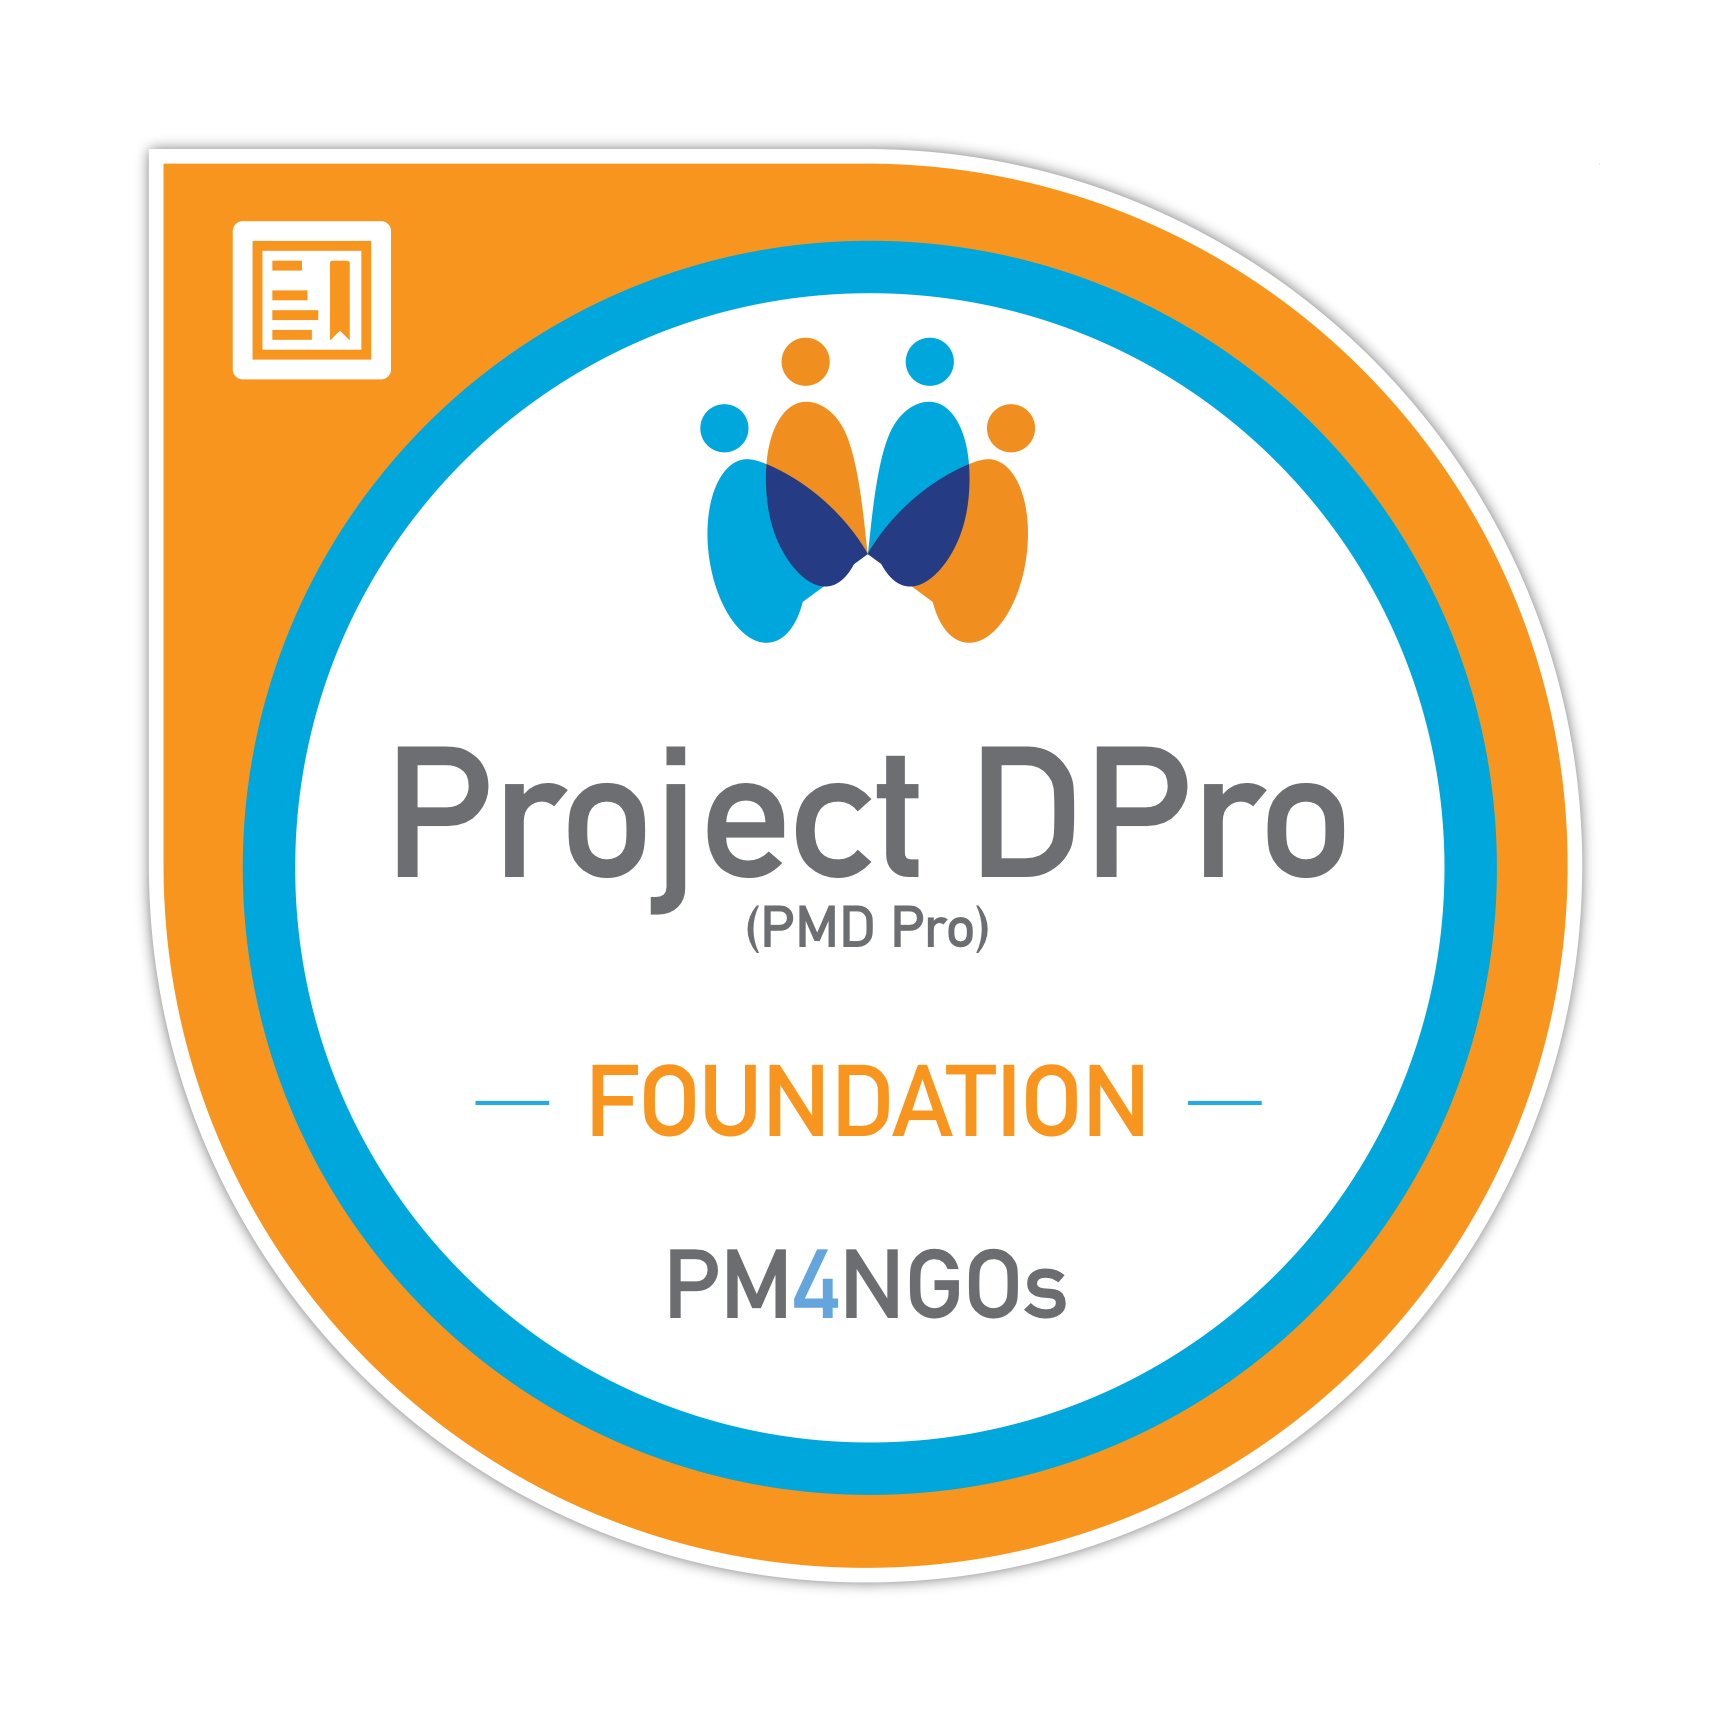 Project DPro PMDPro certification